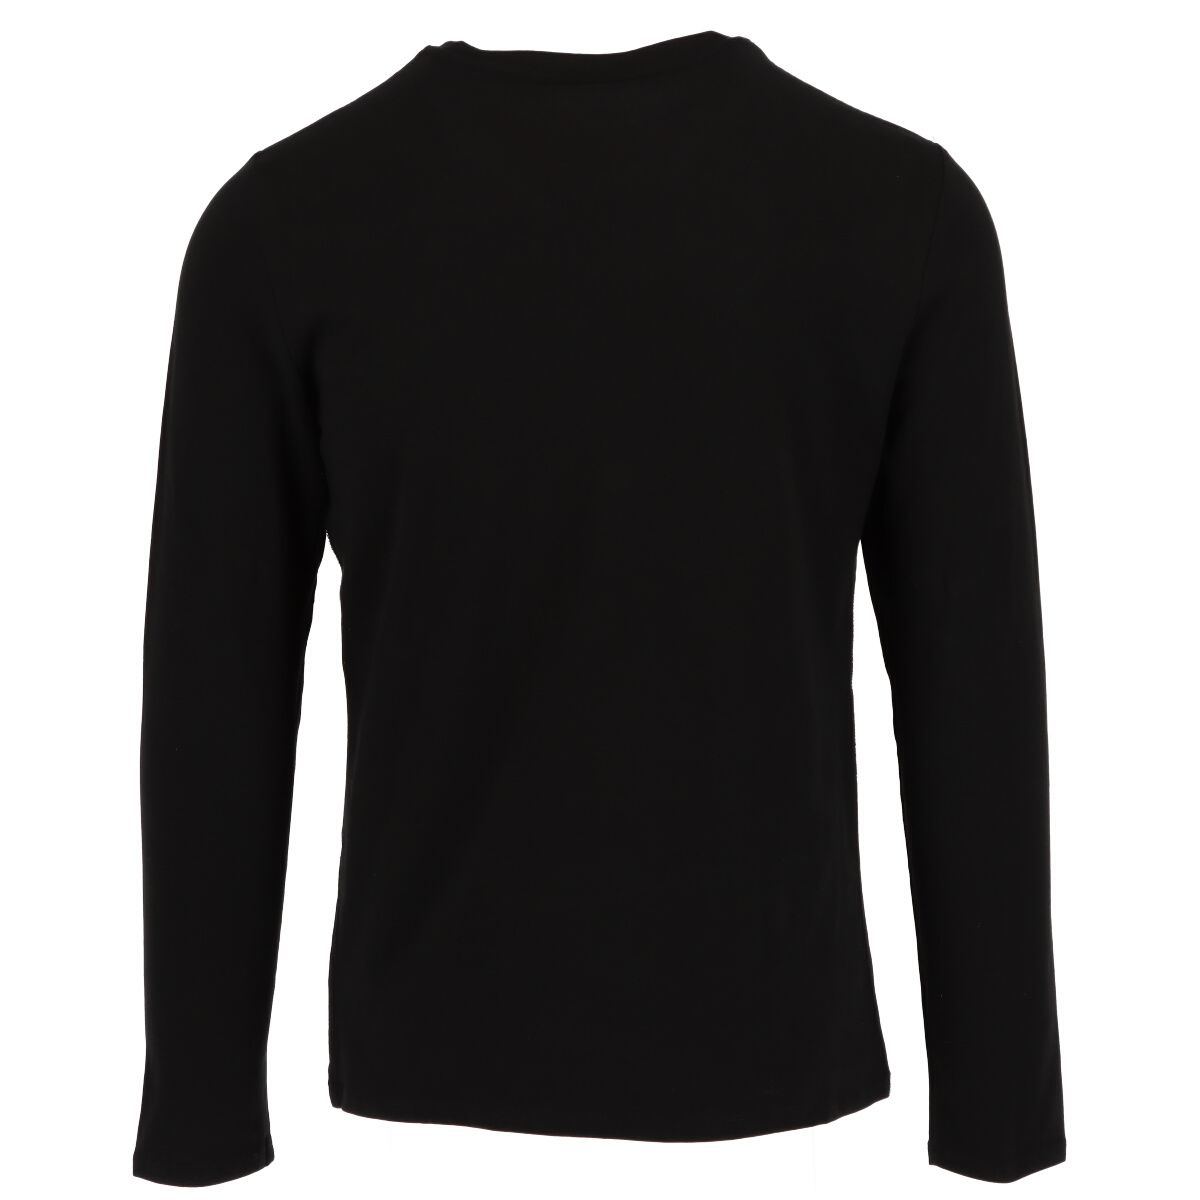 Brand: Guess Gender: Men Type: Knitwear Season: Spring/Summer  PRODUCT DETAIL • Color: black • Pattern: print • Sleeves: long • Neckline: round neck •  Article code: M0YI46J1300  COMPOSITION AND MATERIAL • Composition: -95% cotton -5% elastane  •  Washing: machine wash at 30°